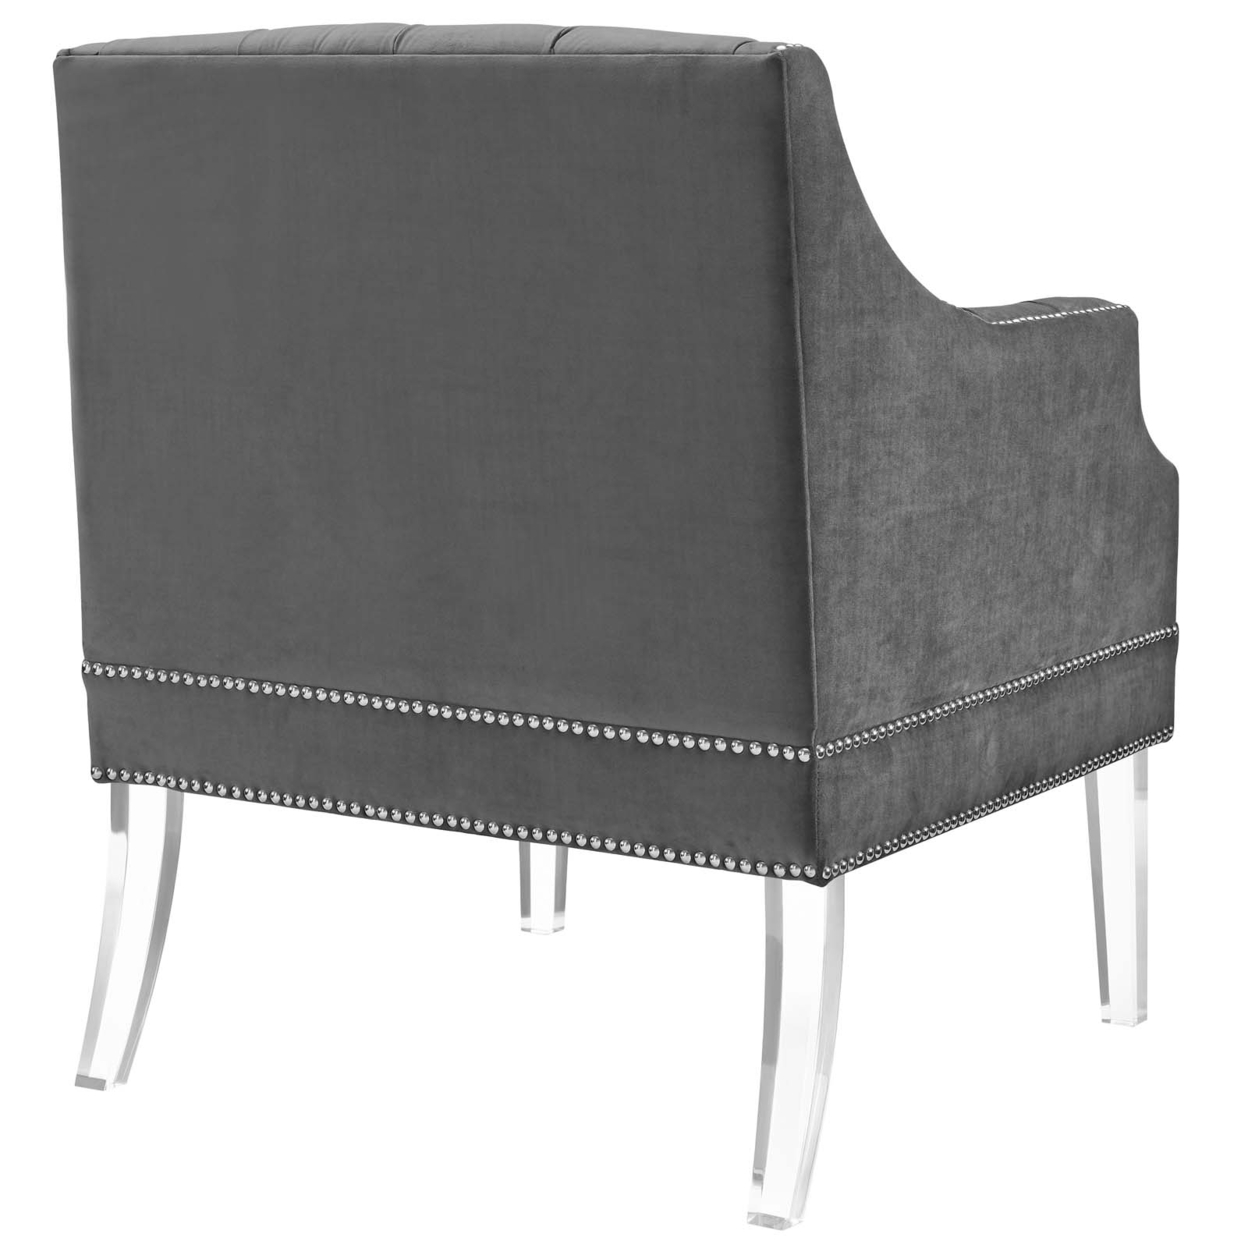 Proverbial Tufted Button Accent Performance Velvet Armchair,Gray